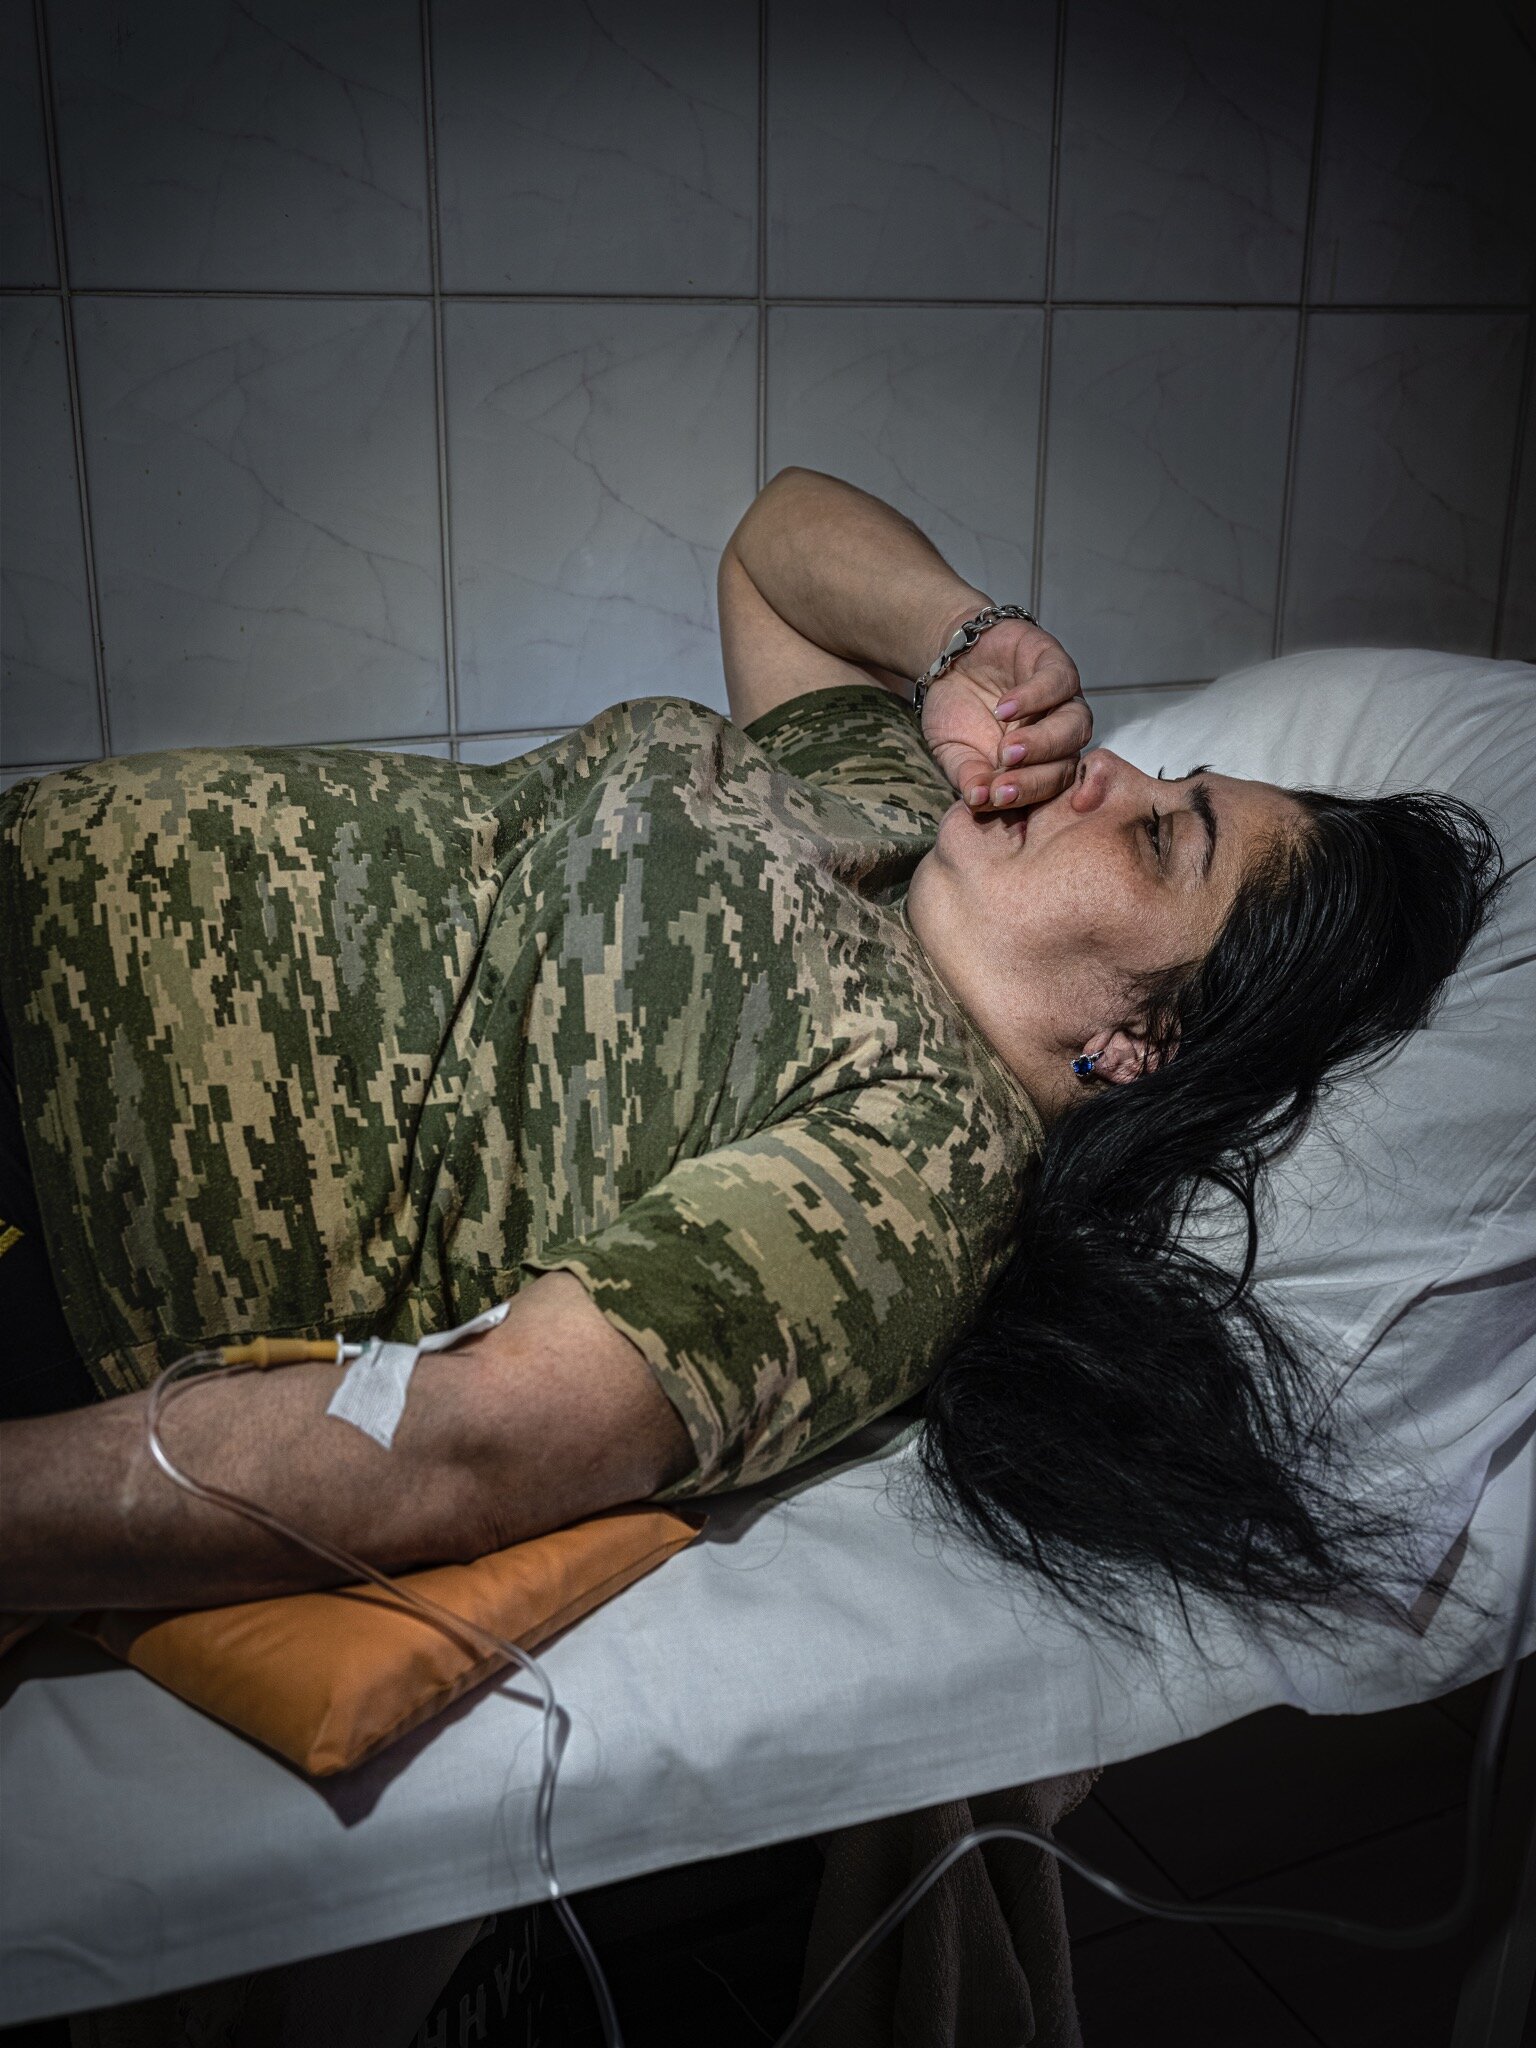 19mag-Ukraine-11-mobileMasterAt3x ‘I Live in Hell’: The Psychic Wounds of Ukraine’s Soldiers